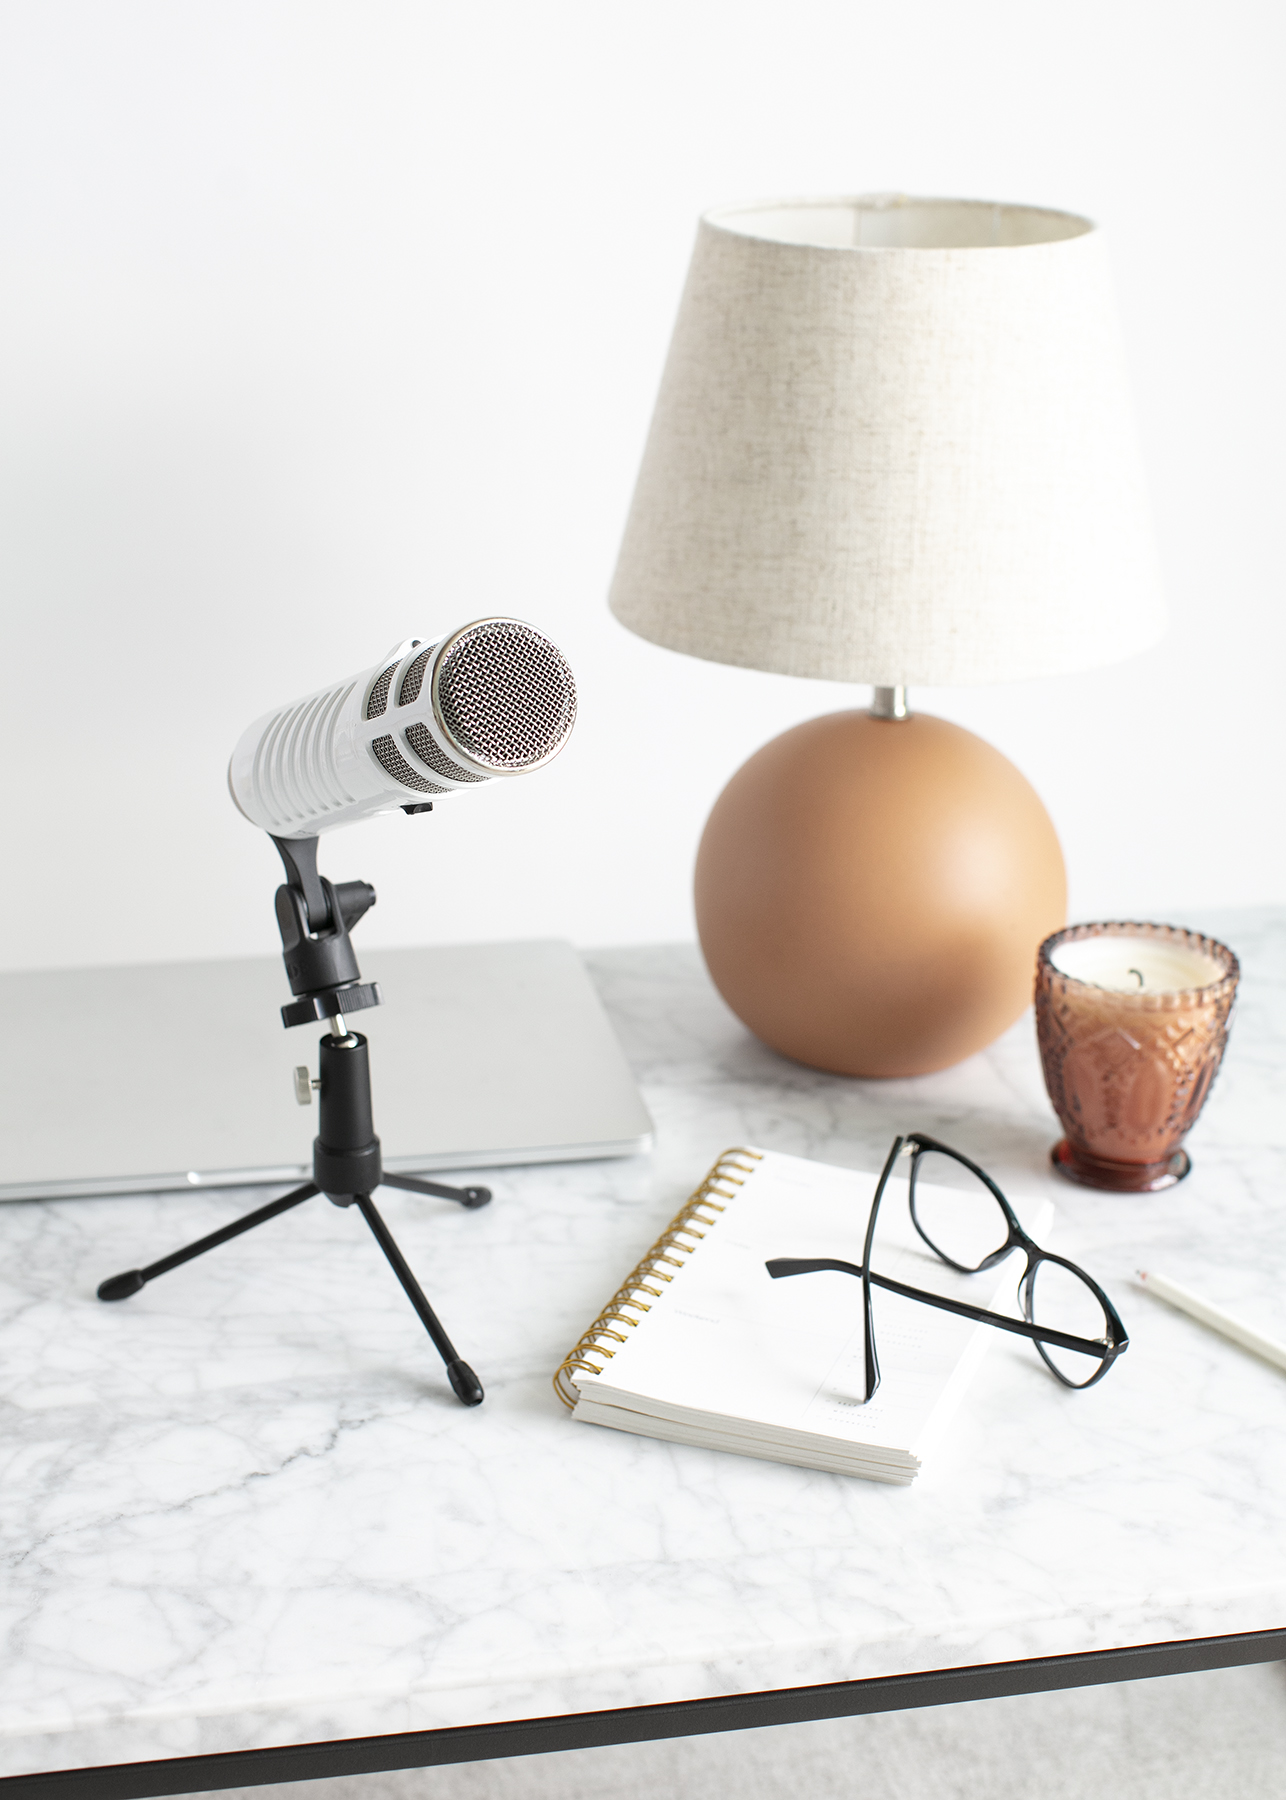 How to Make Money with Podcasting